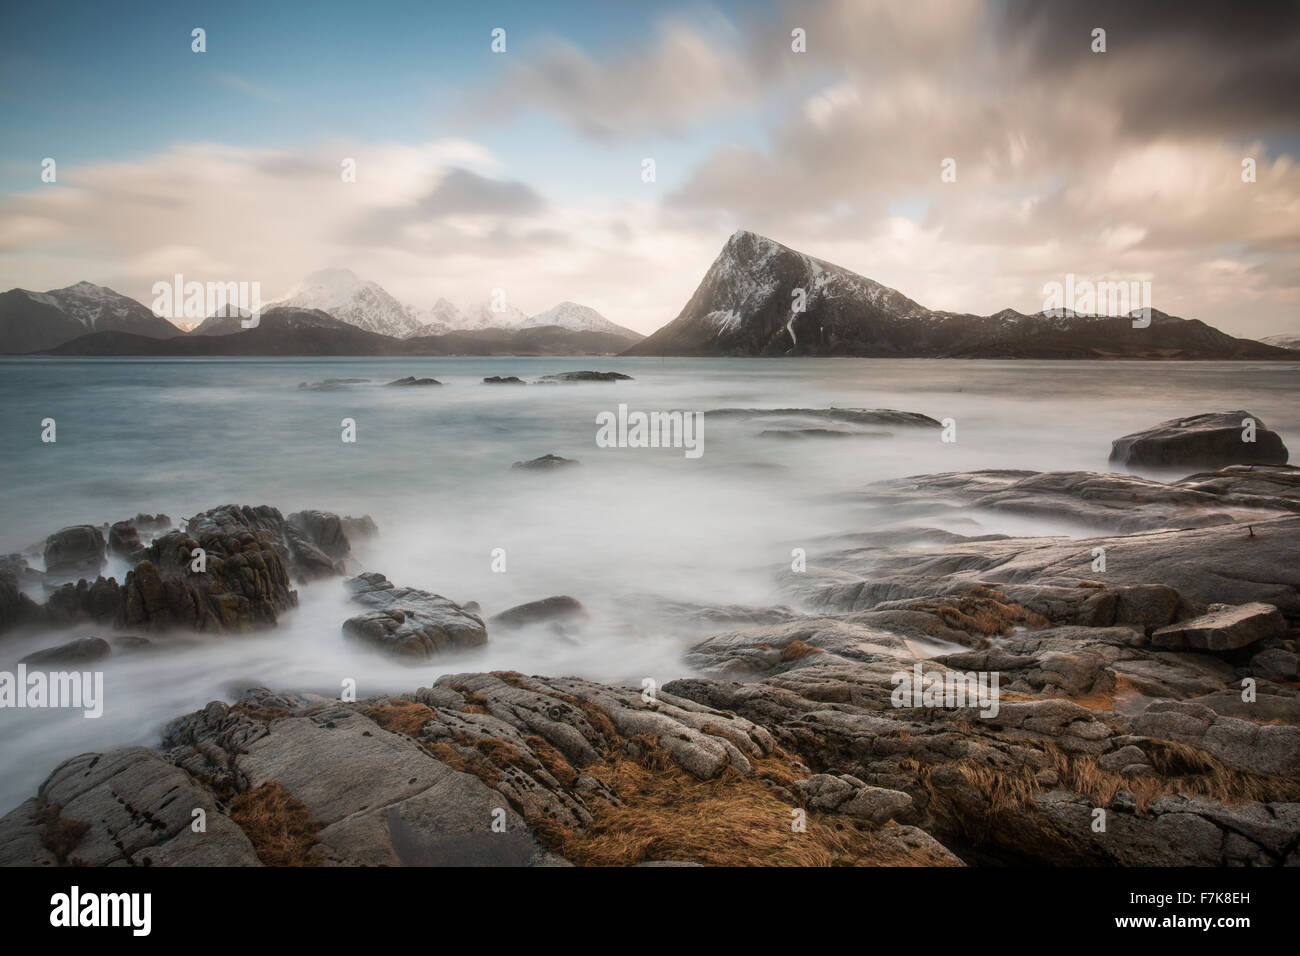 Scenic view mountains and cold craggy ocean, Vagje Lofoten Islands, Norway Stock Photo